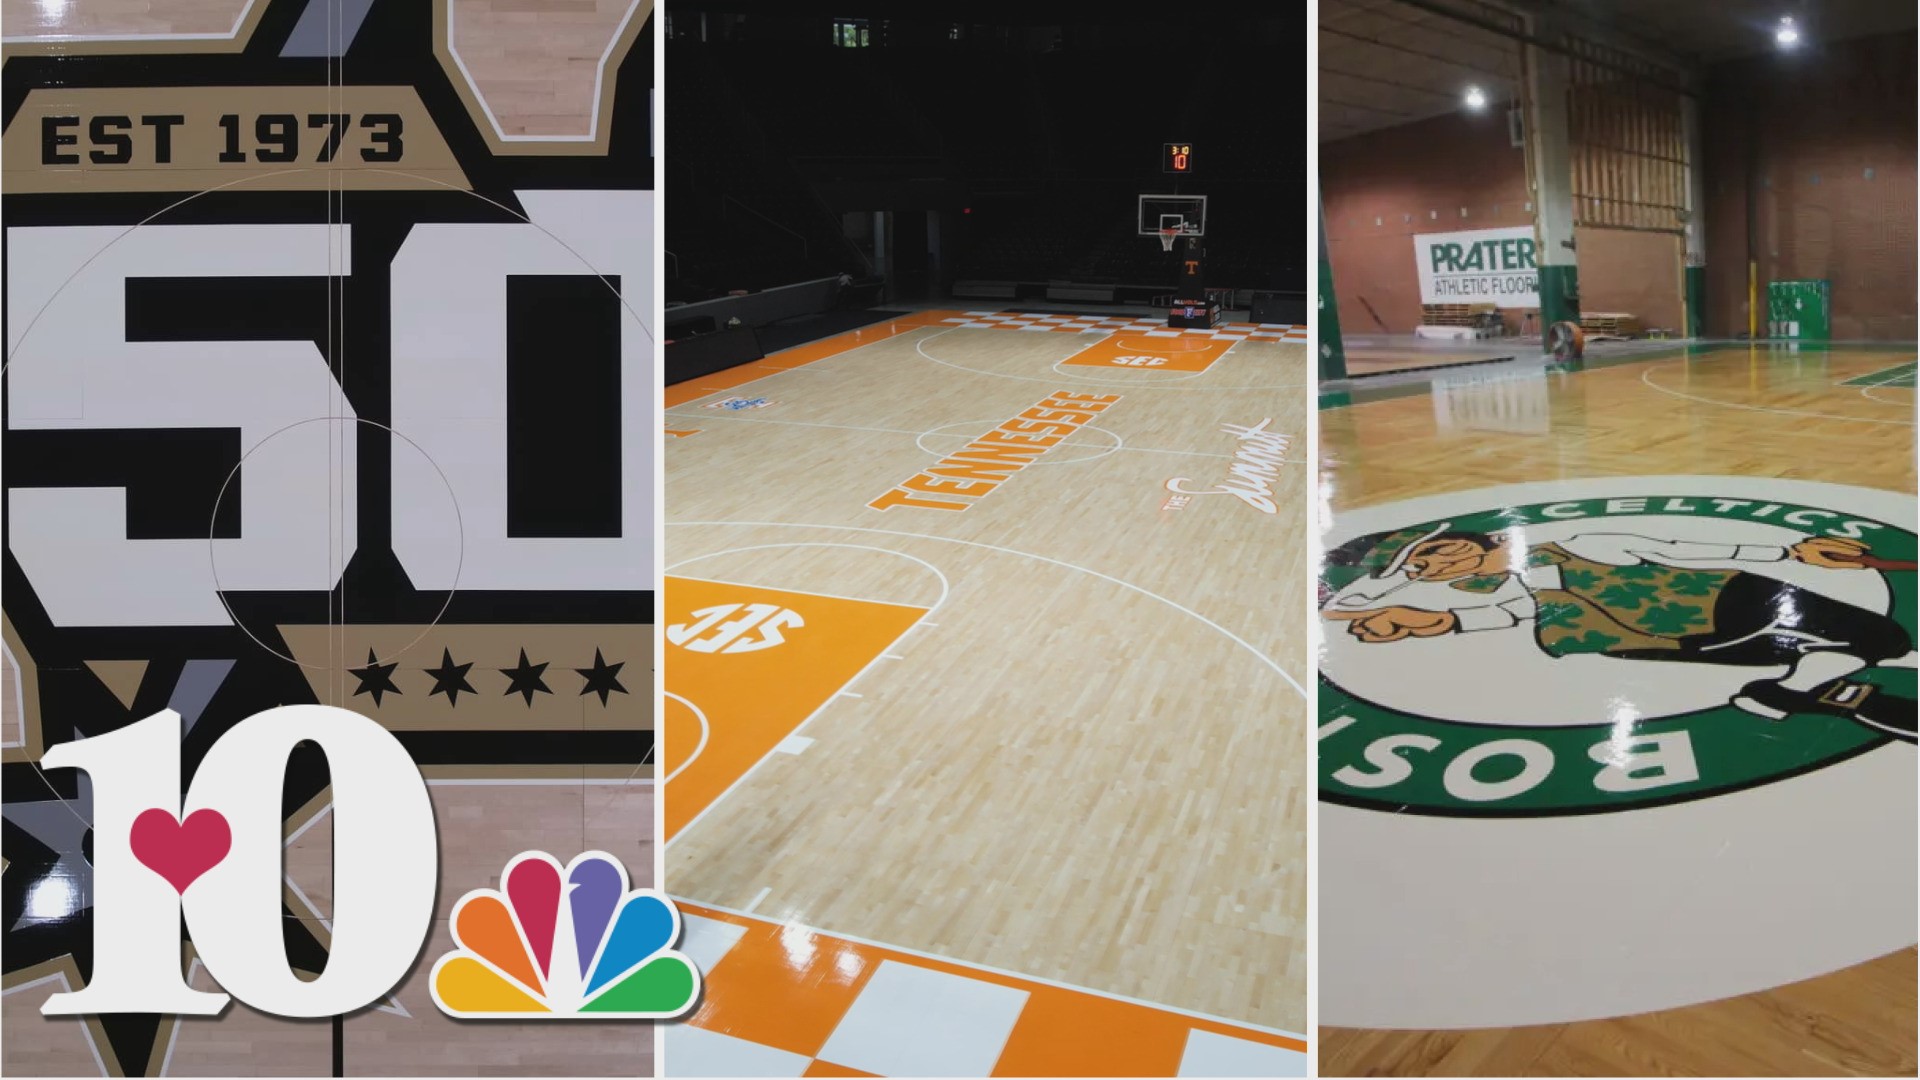 Praters Flooring in Chattanooga, Tennessee has been manufacturing basketball courts for over three decades.